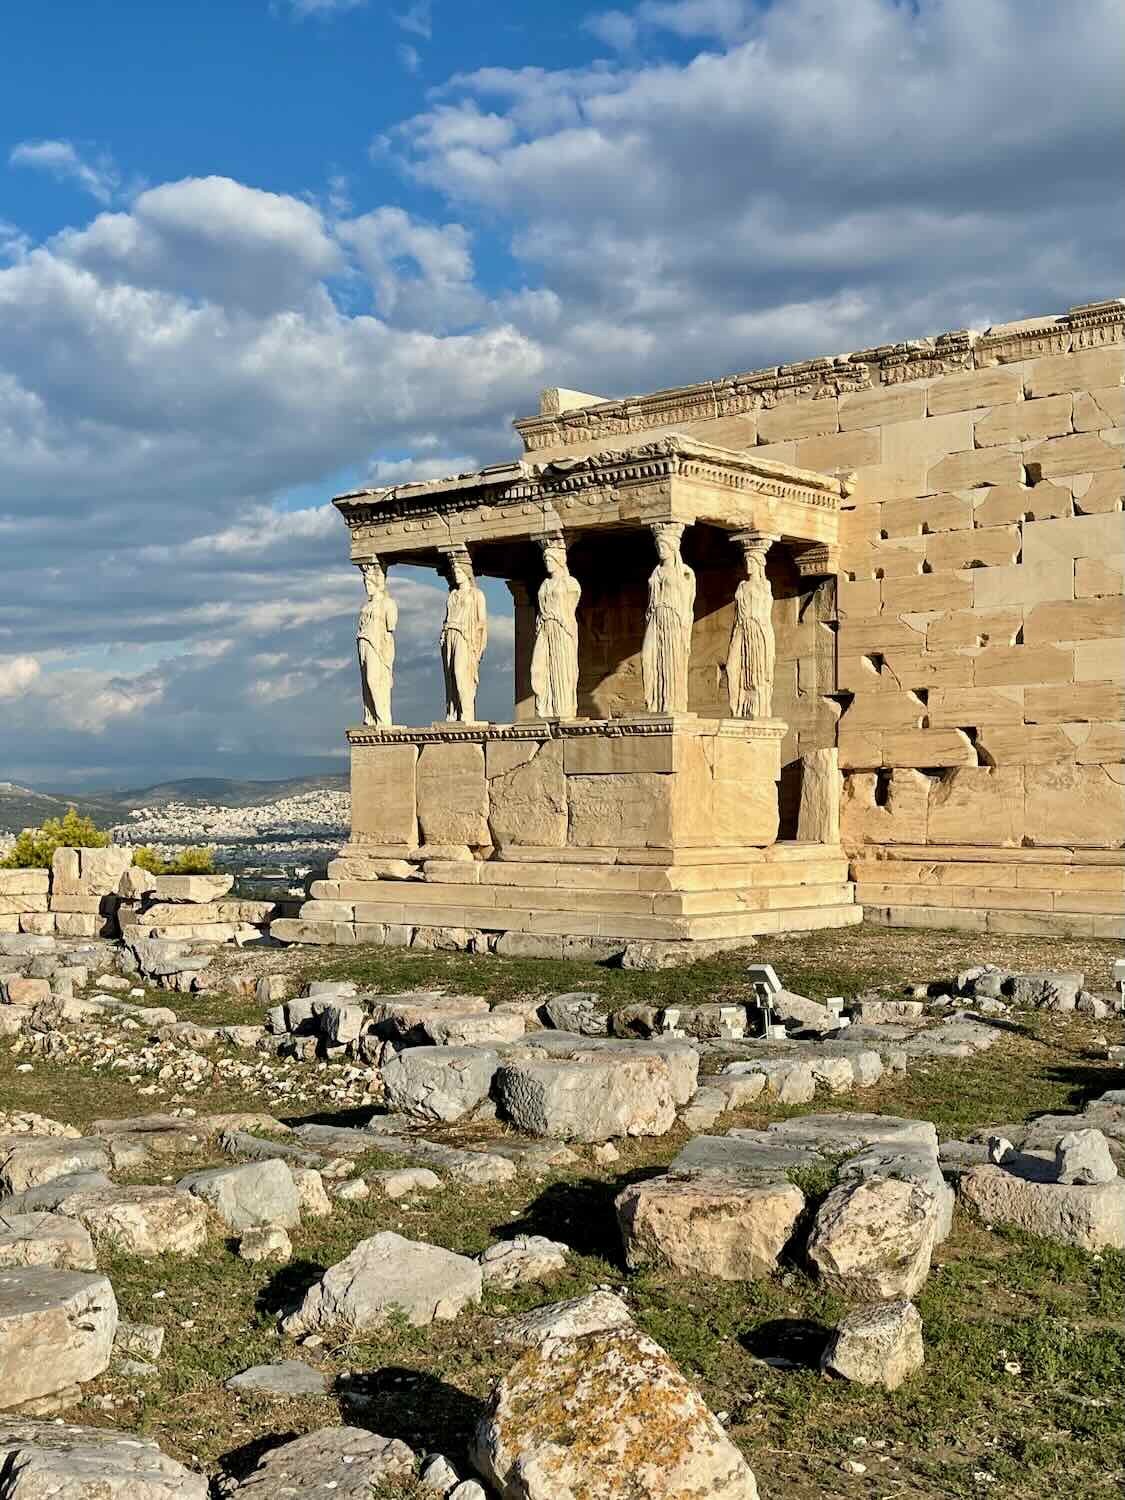 A photo of the Porch of the Caryatids at the Erechtheion, featuring six draped female figures as supporting columns, with a backdrop of the Acropolis and cloudy sky.